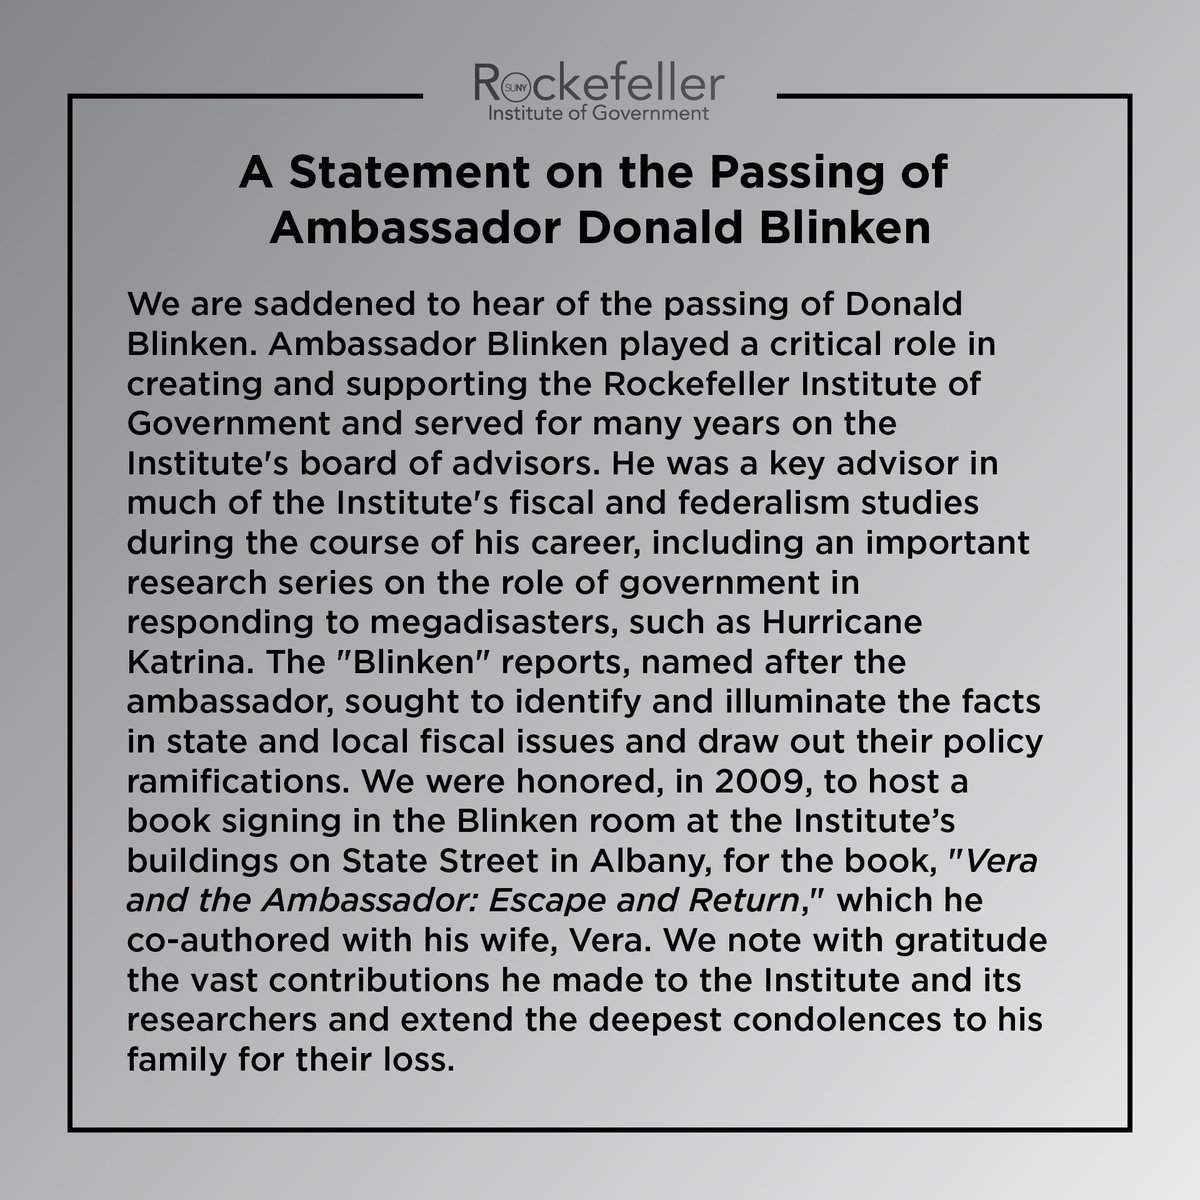 We are saddened to hear of the passing of Ambassador Donald Blinken. The ambassador played a critical role in creating, supporting, and advising the Institute over the course of his career. Our full statement is below.